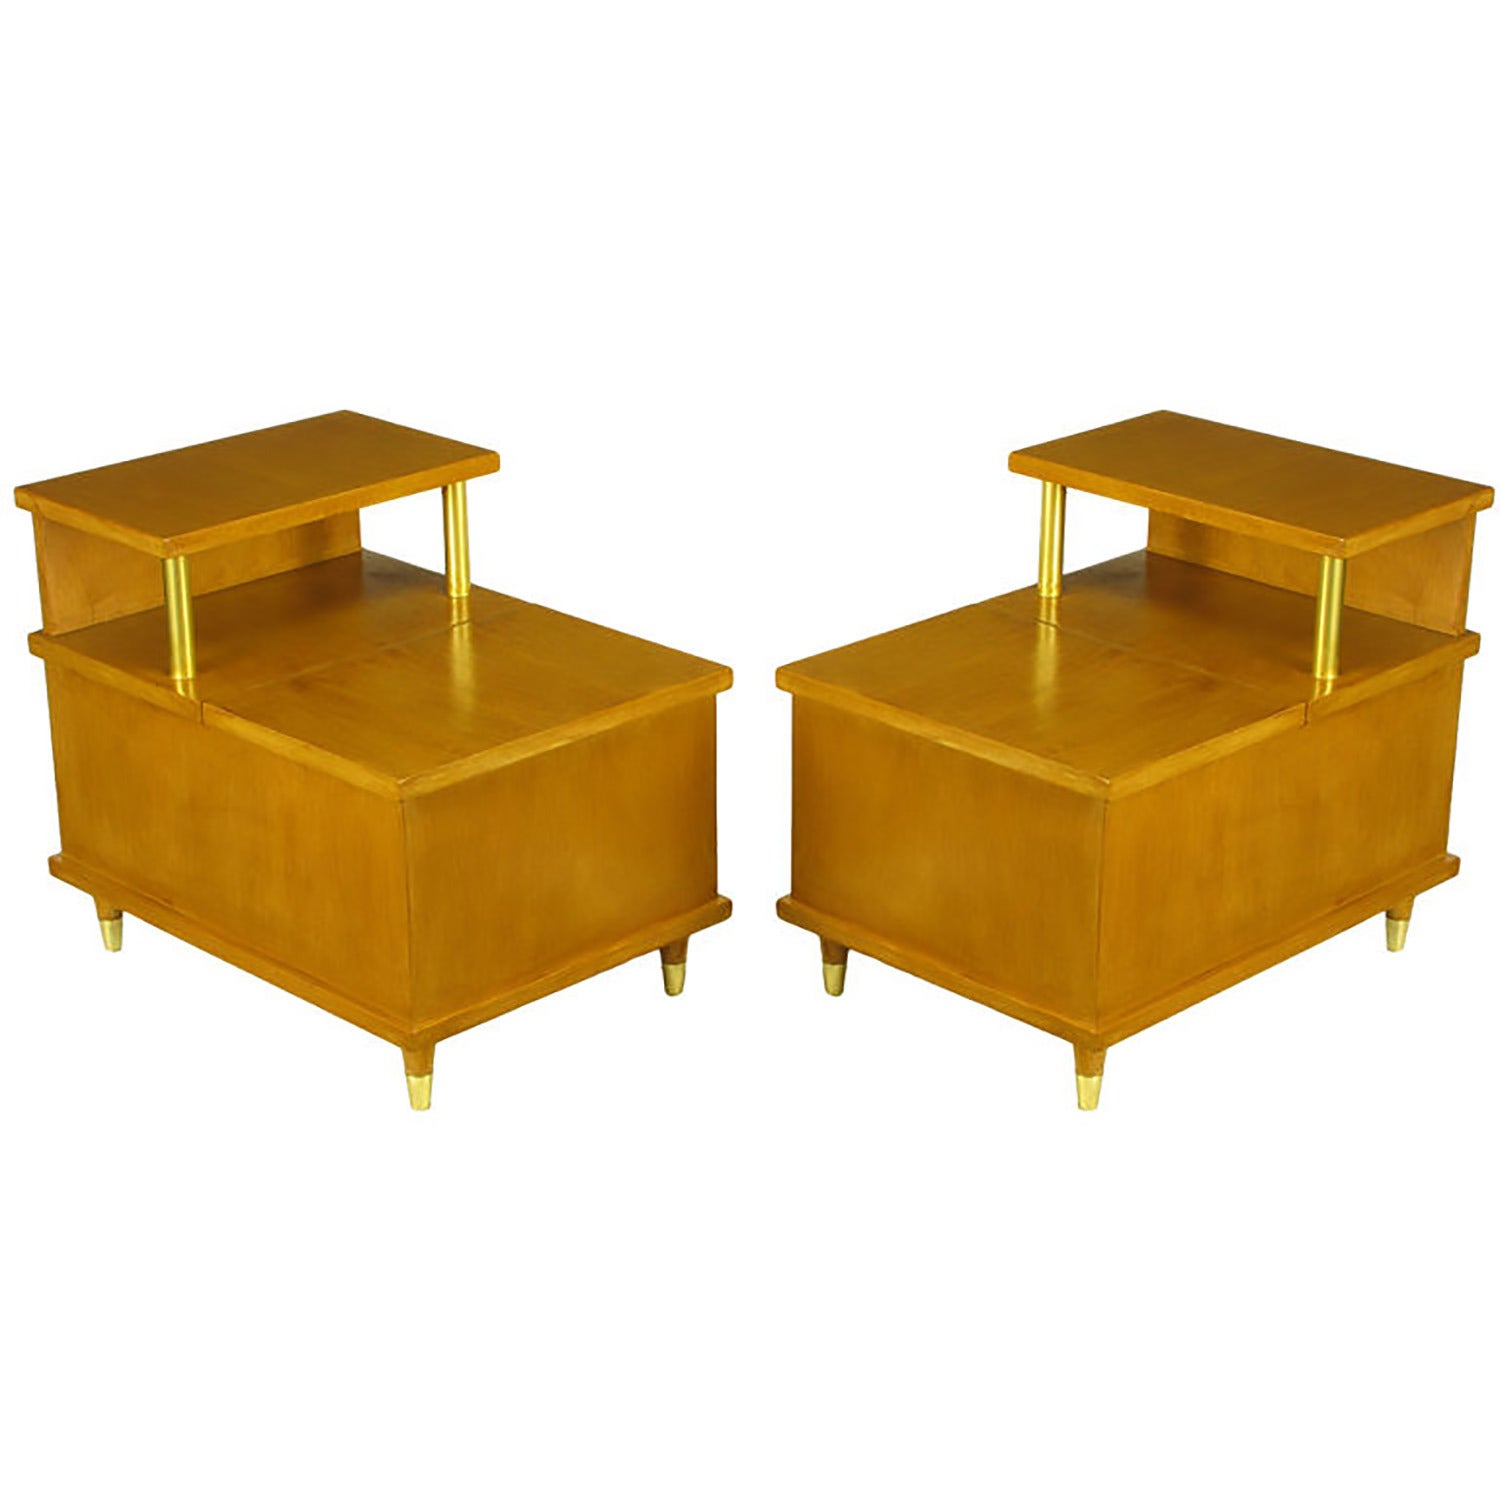 Pair of Two-Tier End Tables with Cedar-Lined Storage